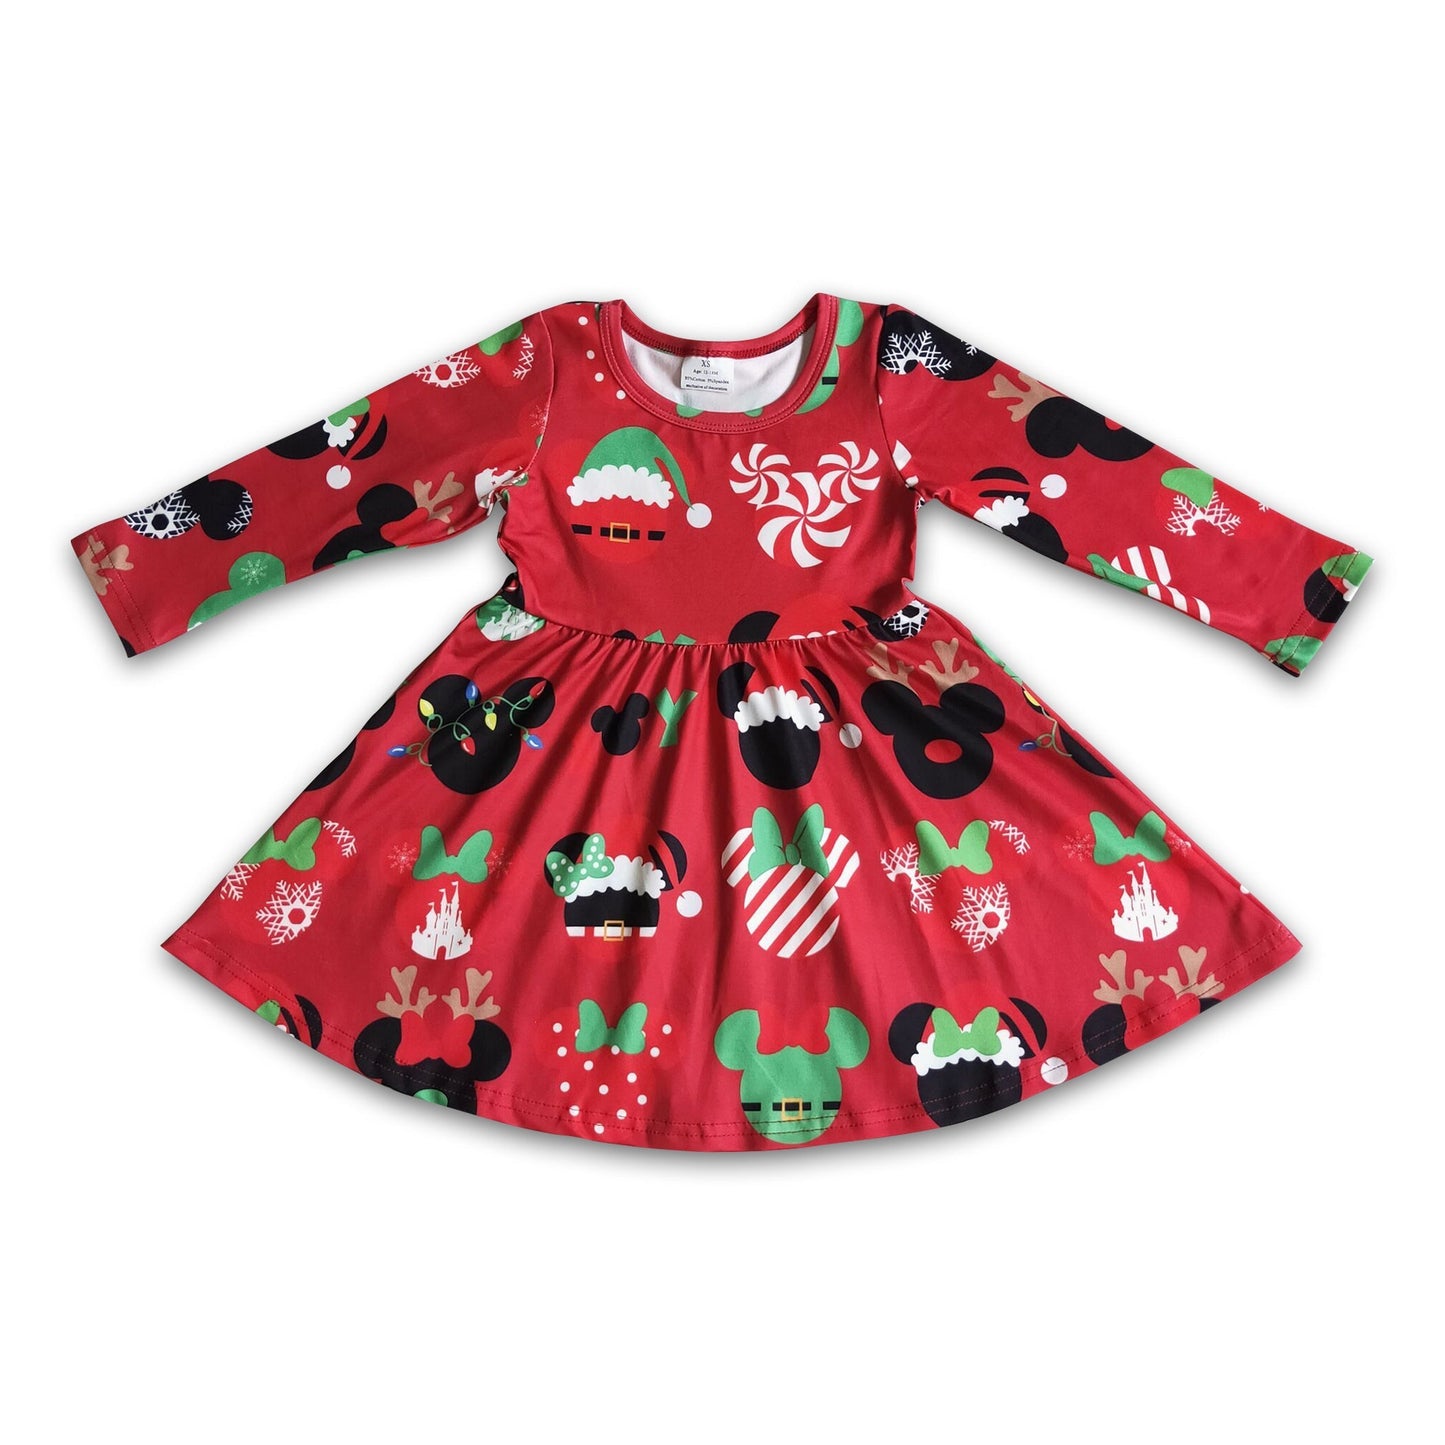 Red mouse long sleeve girls boutique Christmas twirl dresses